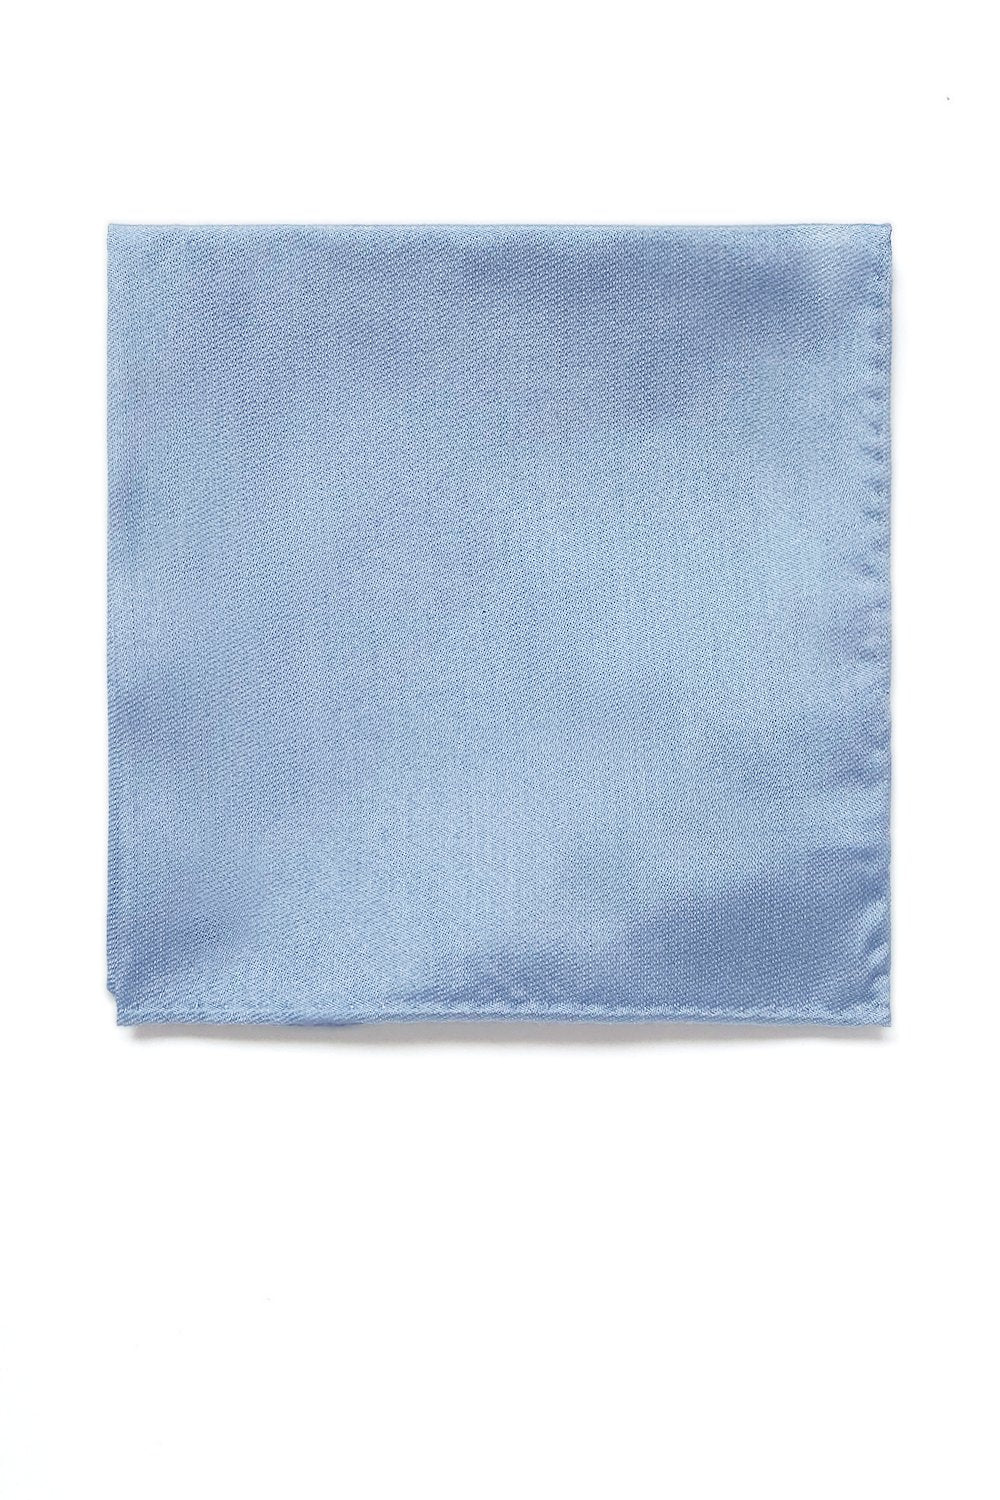 Didi Pocket Square in dusty blue by Birdy Grey, front view